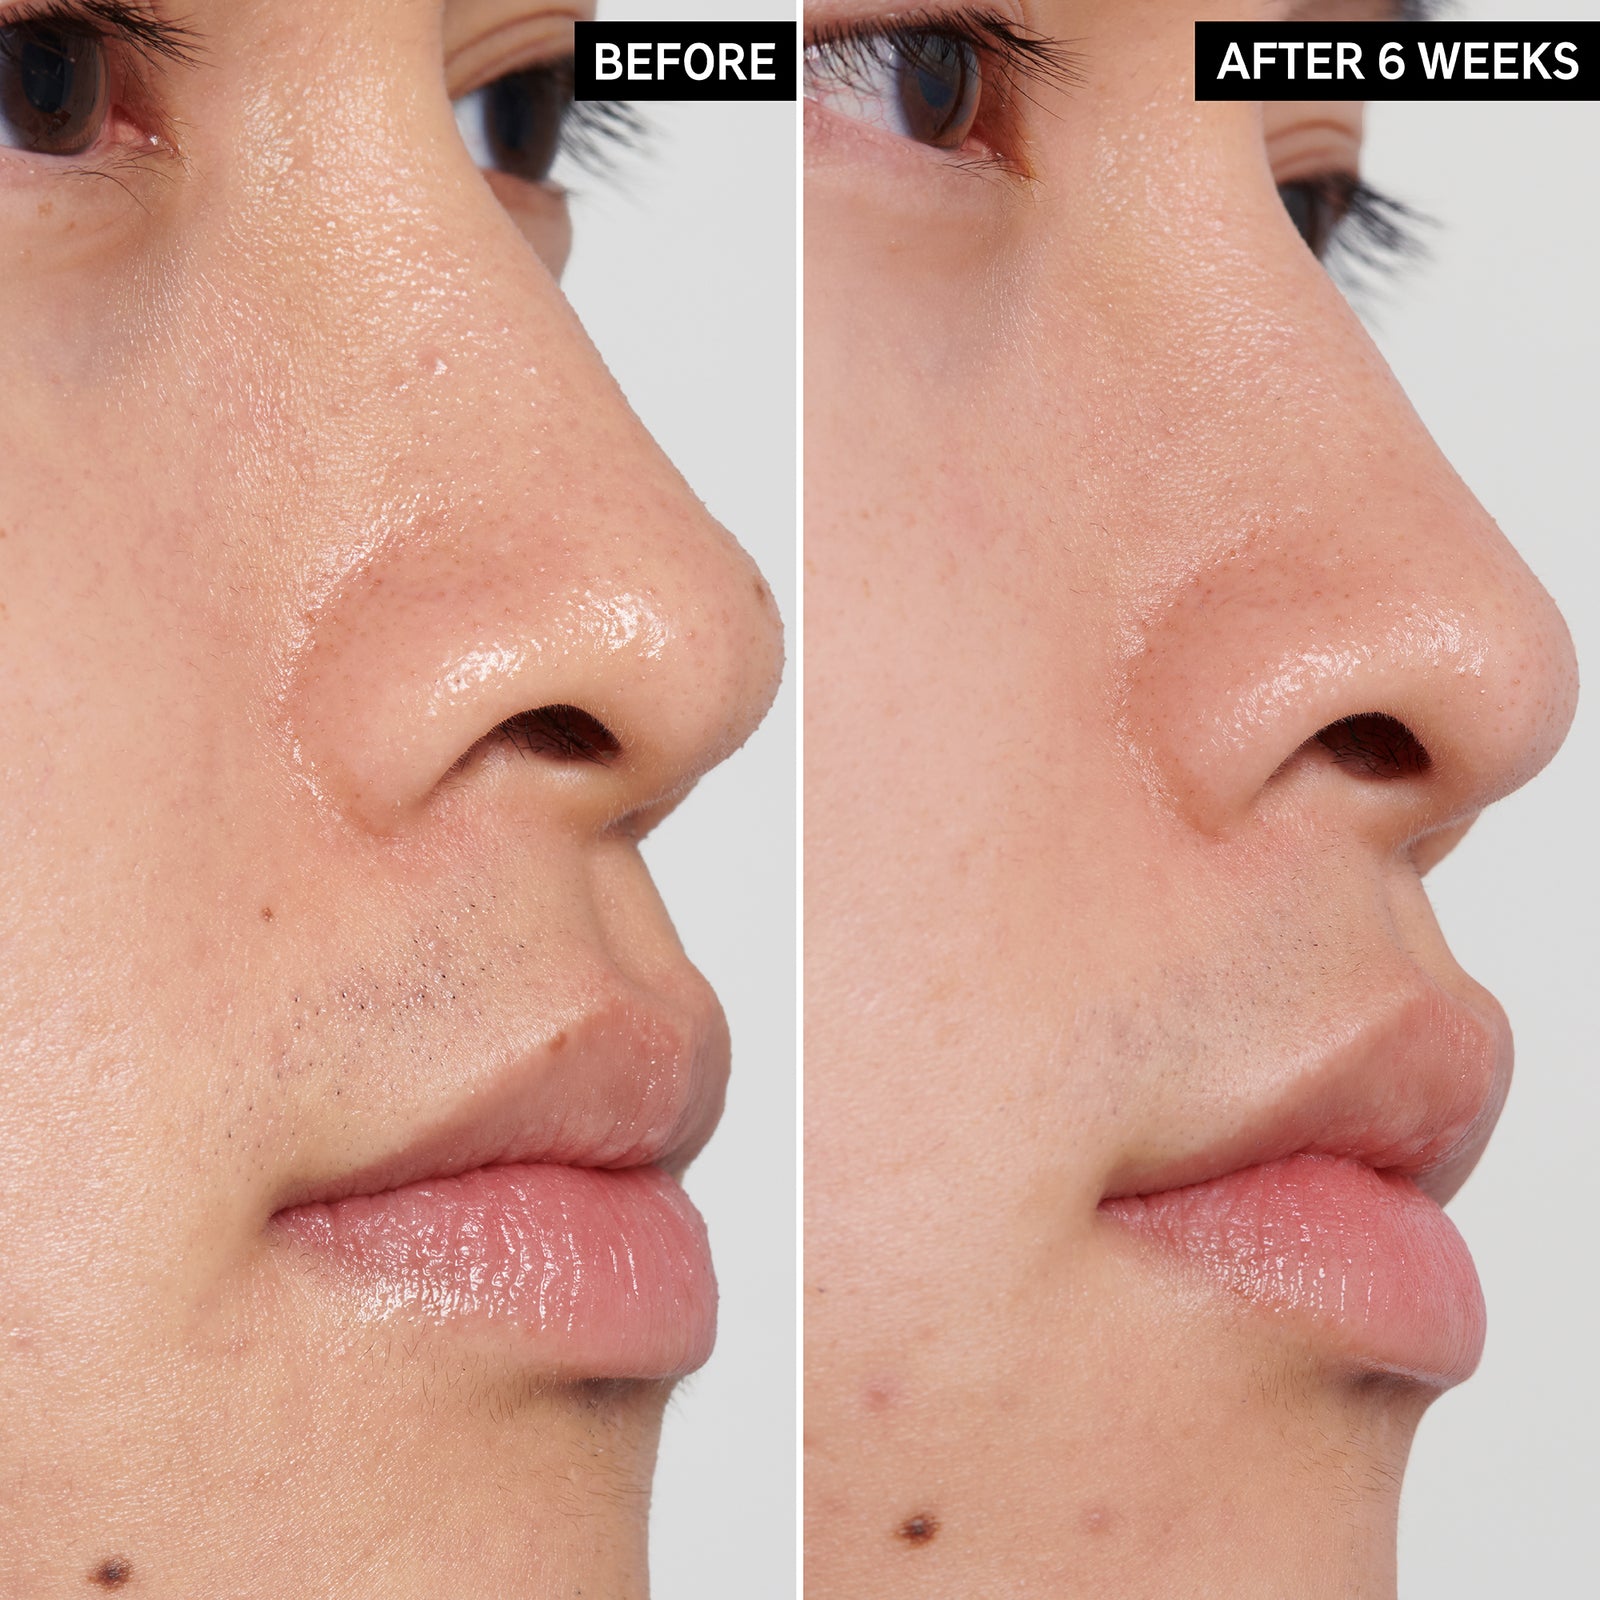 2 images of a model's face side by side to show before and after using PHA Toner for 6 weeks